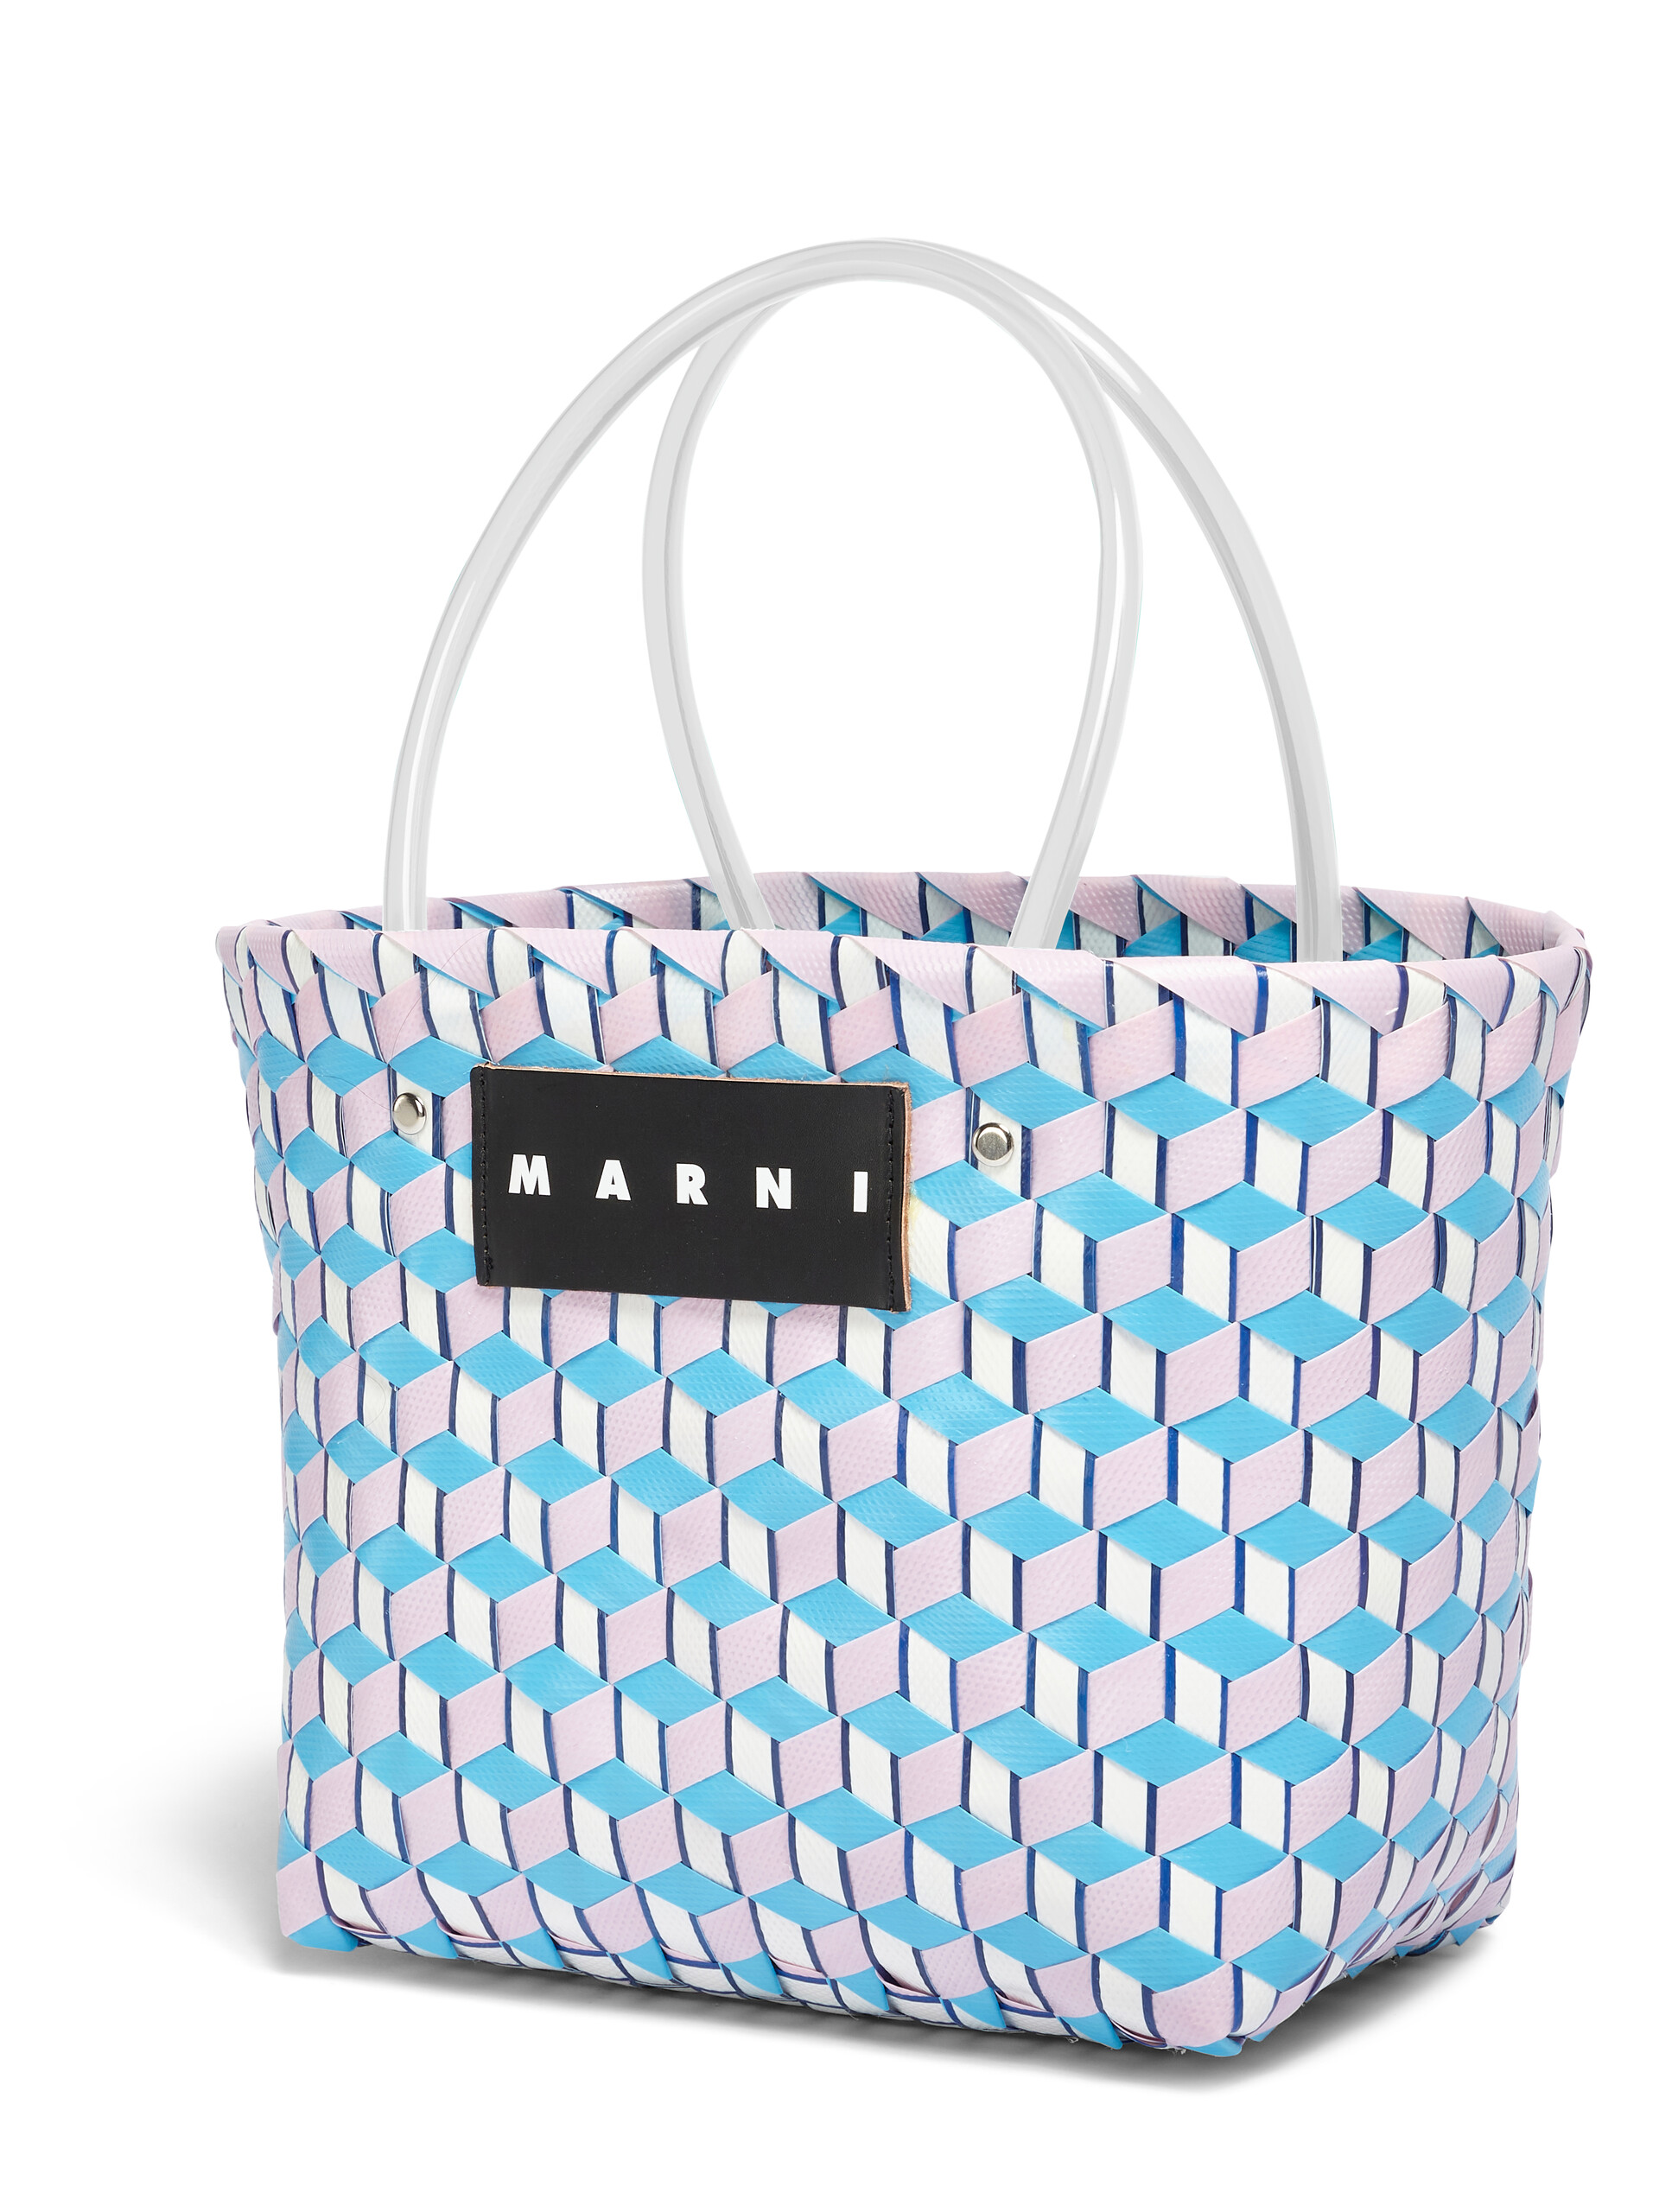 MARNI MARKET 3D BAG in pale blue cube woven material - Bags - Image 4